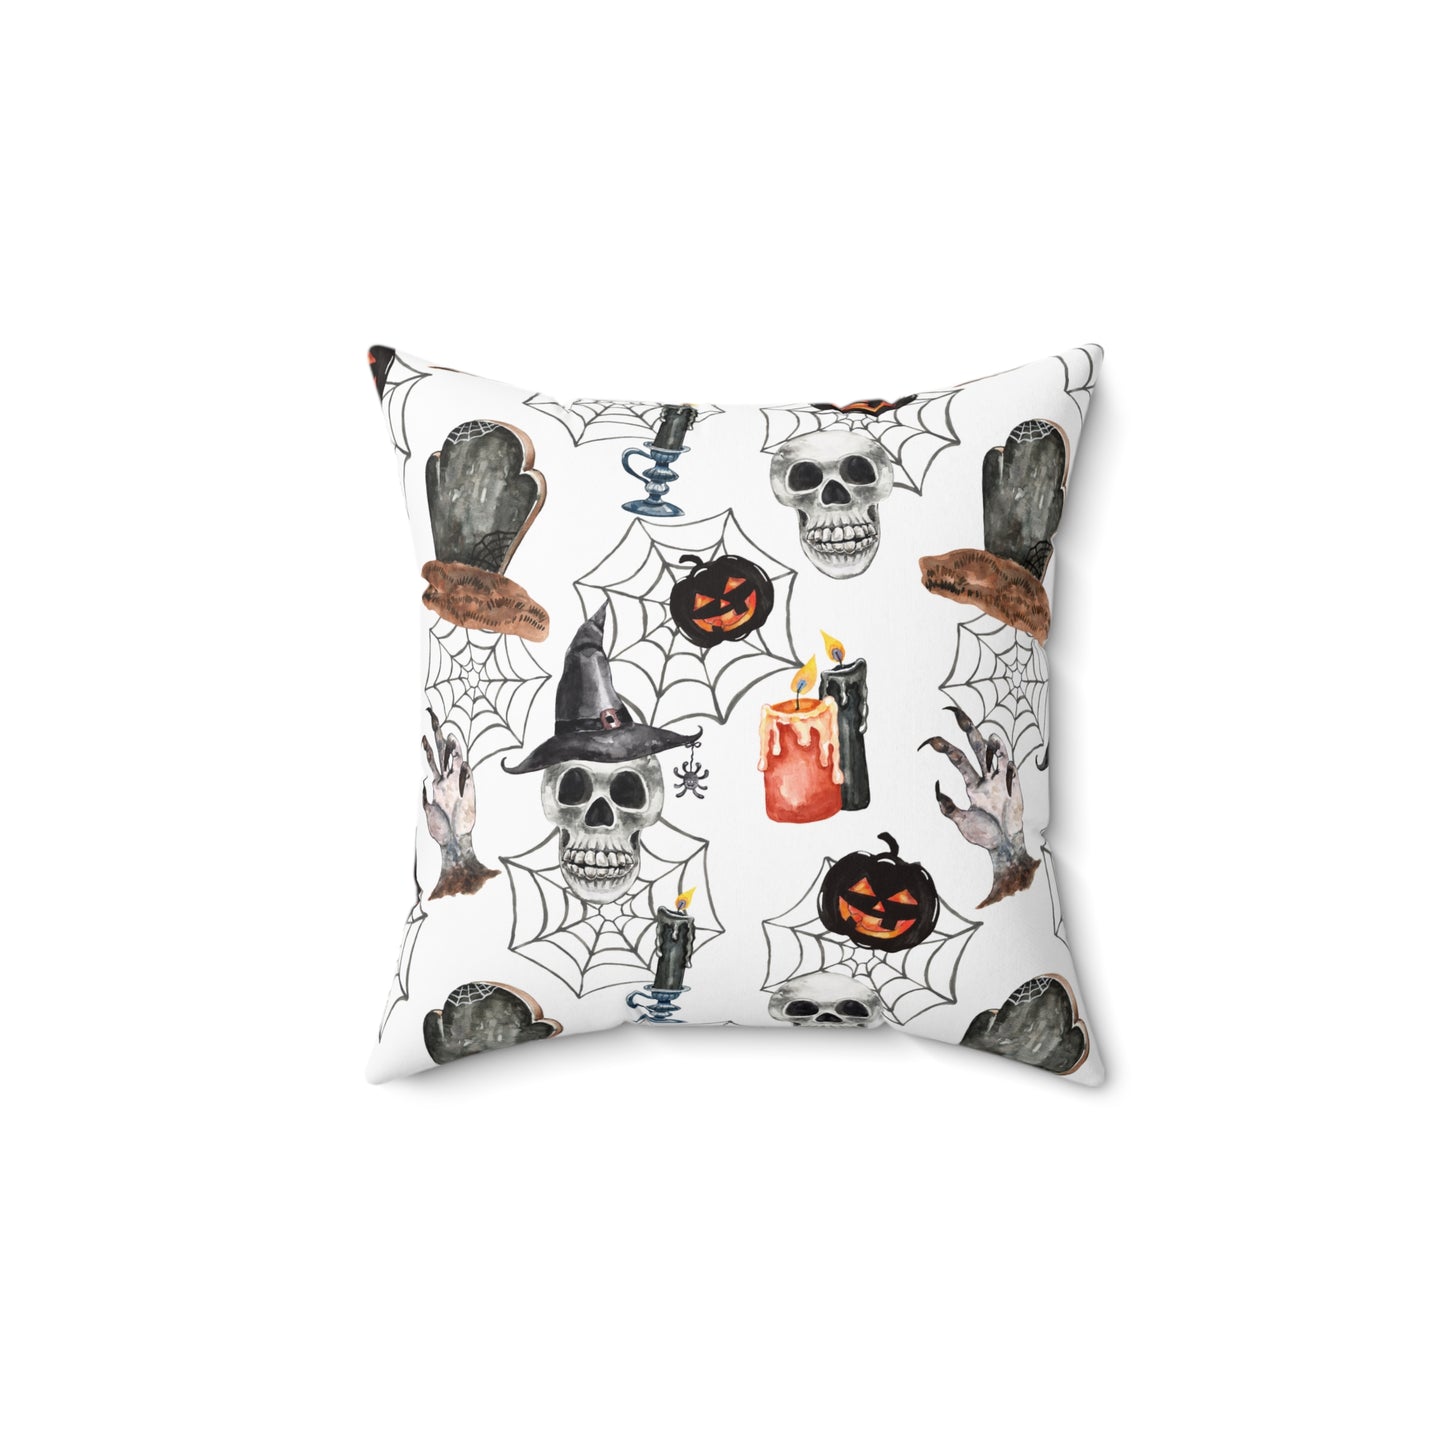 Skulls and Pumpkins Spun Polyester Square Pillow with Insert